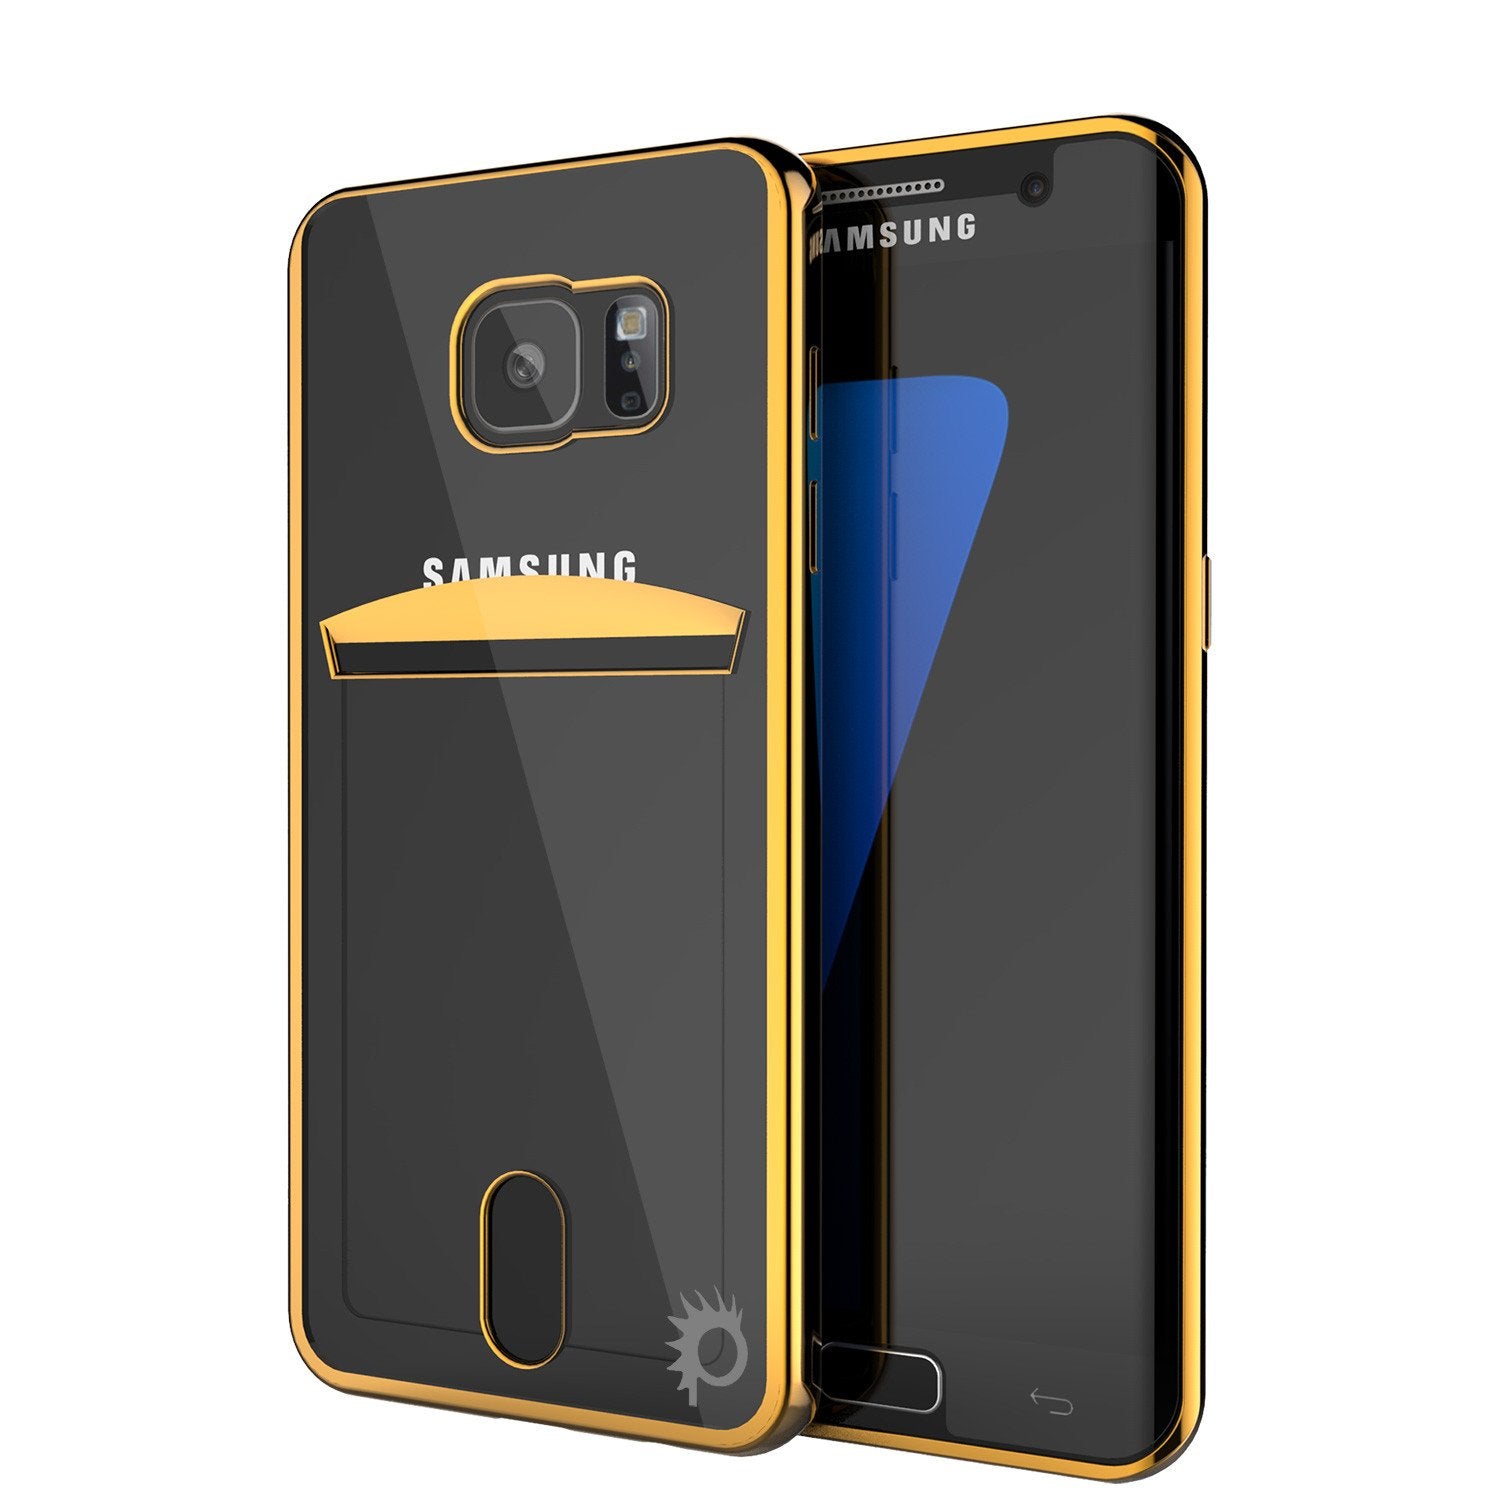 Galaxy S7 EDGE Case, PUNKCASE® LUCID Gold Series | Card Slot | SHIELD Screen Protector | Ultra fit